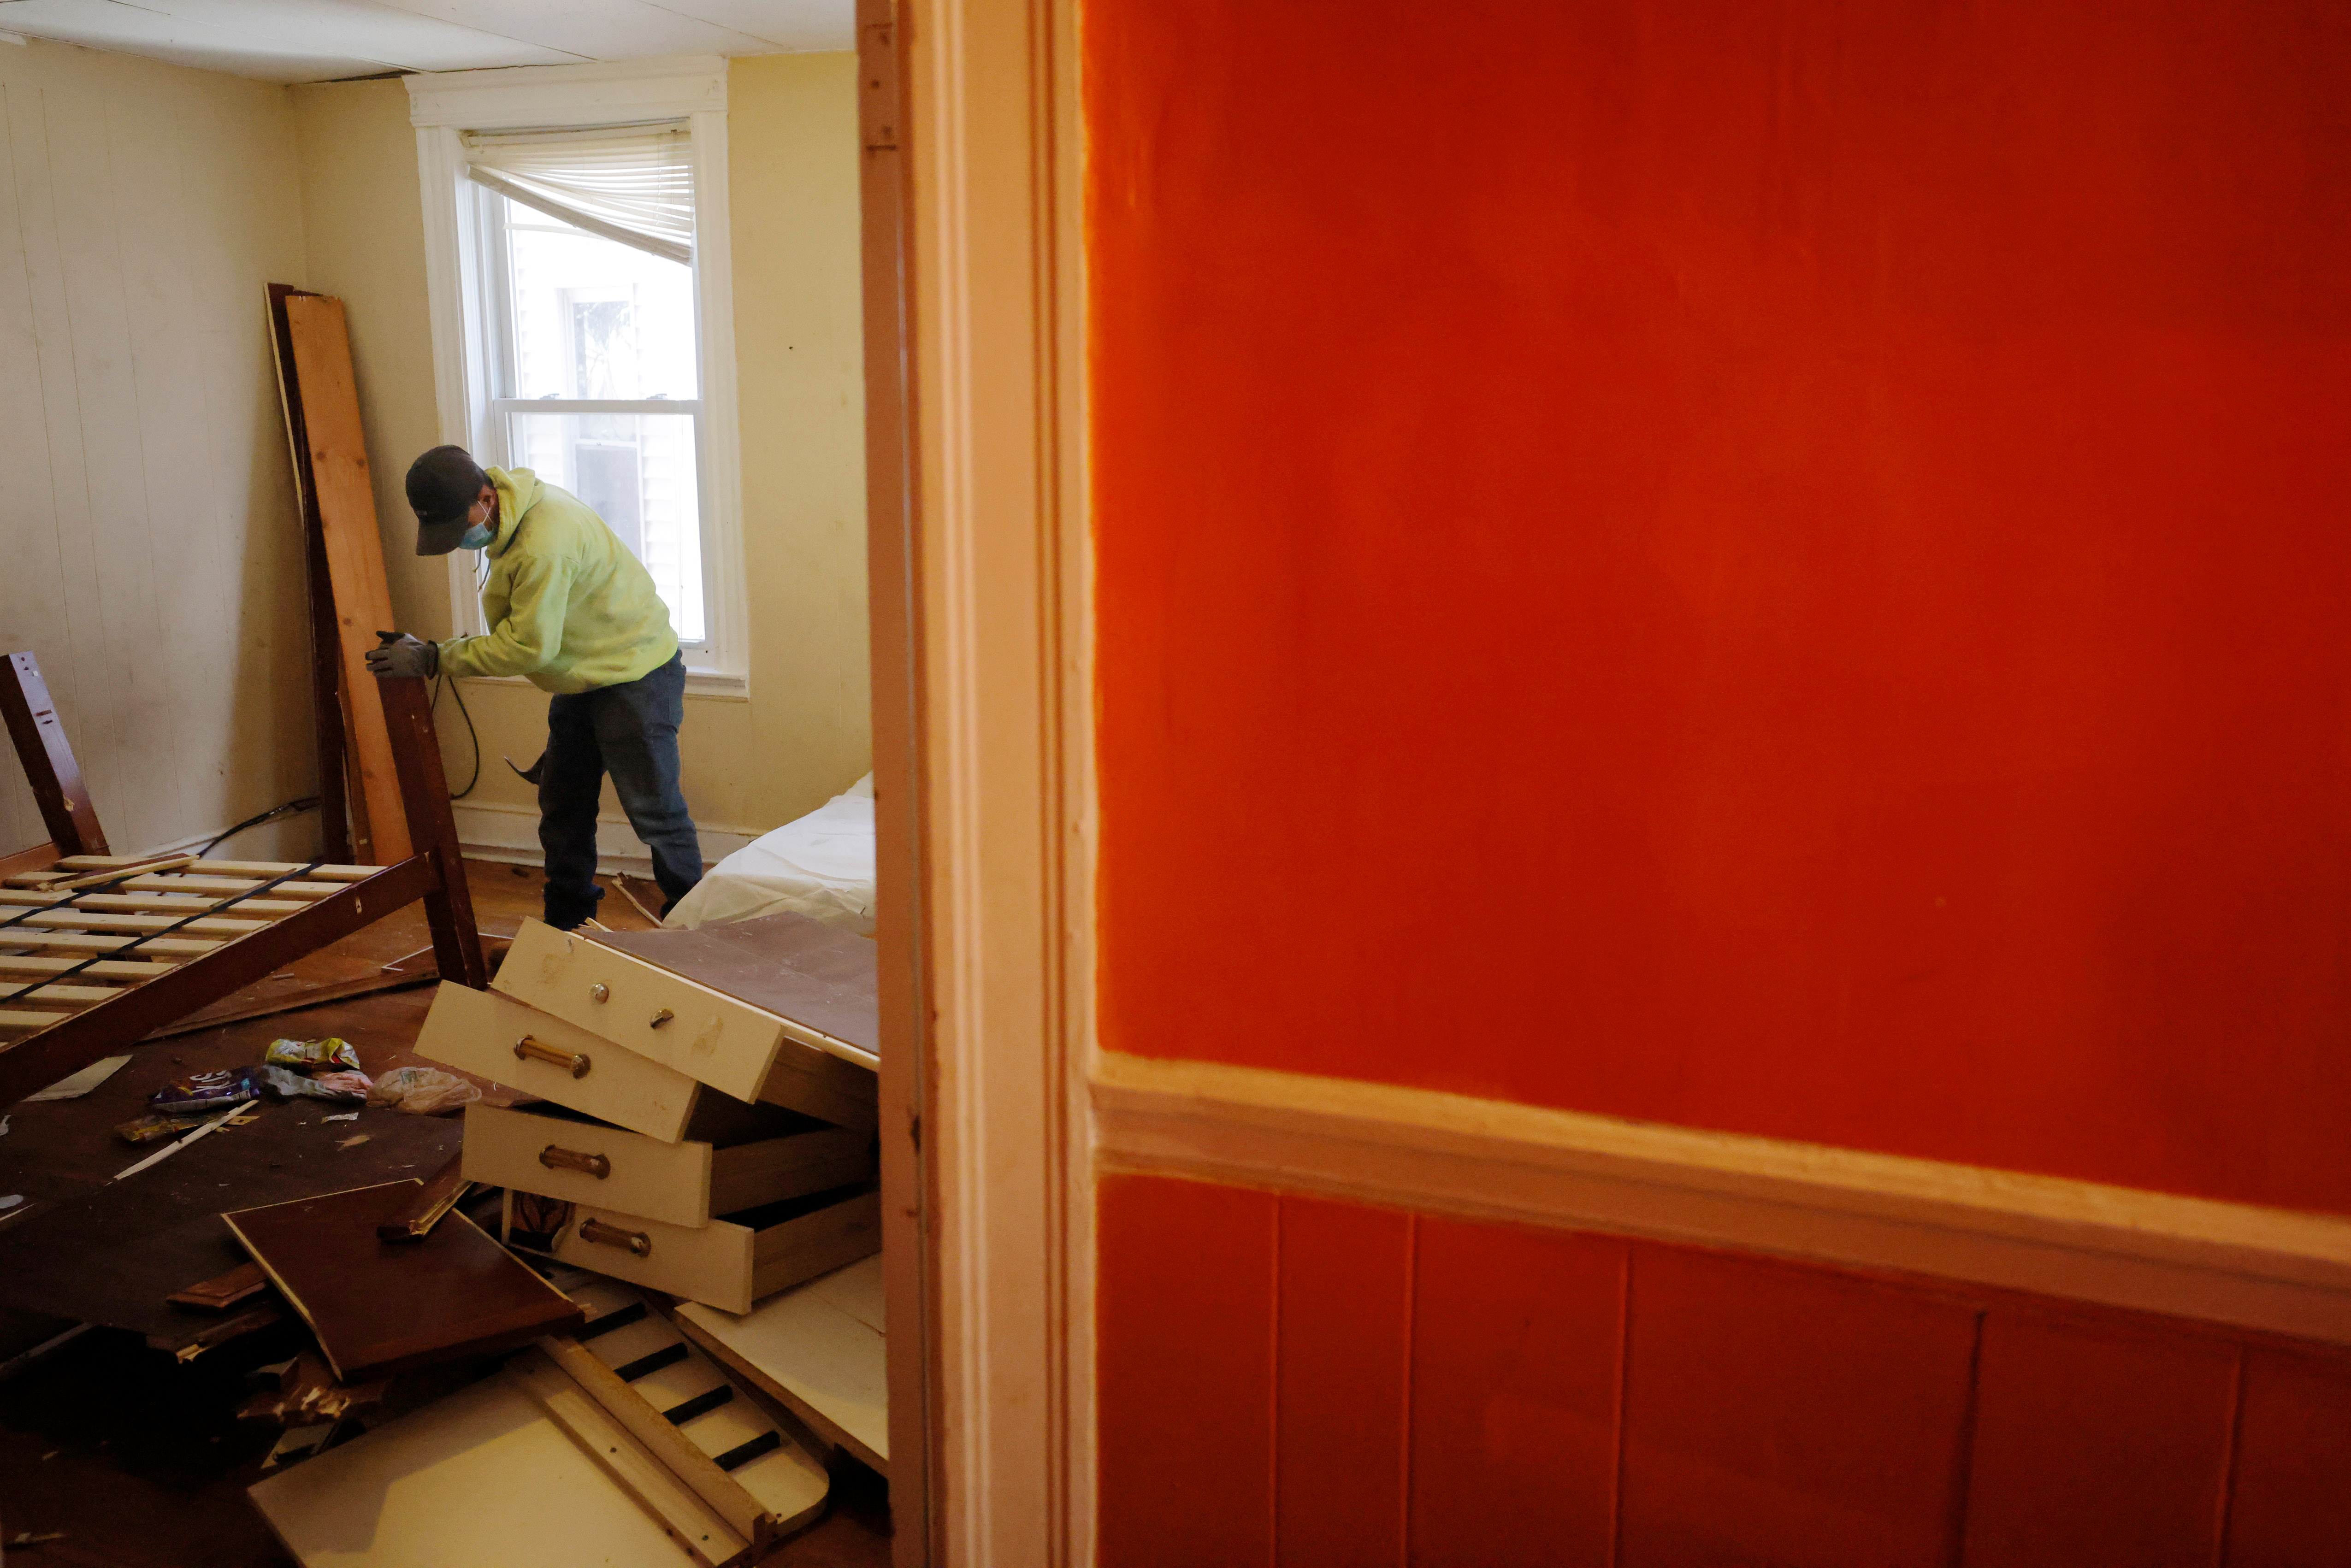 Workers break up the furniture left by a renter who was evicted after a 48-hours notice for violating the terms of her lease in Chelsea, Massachusetts, U.S., March 29, 2021. REUTERS/Brian Snyder